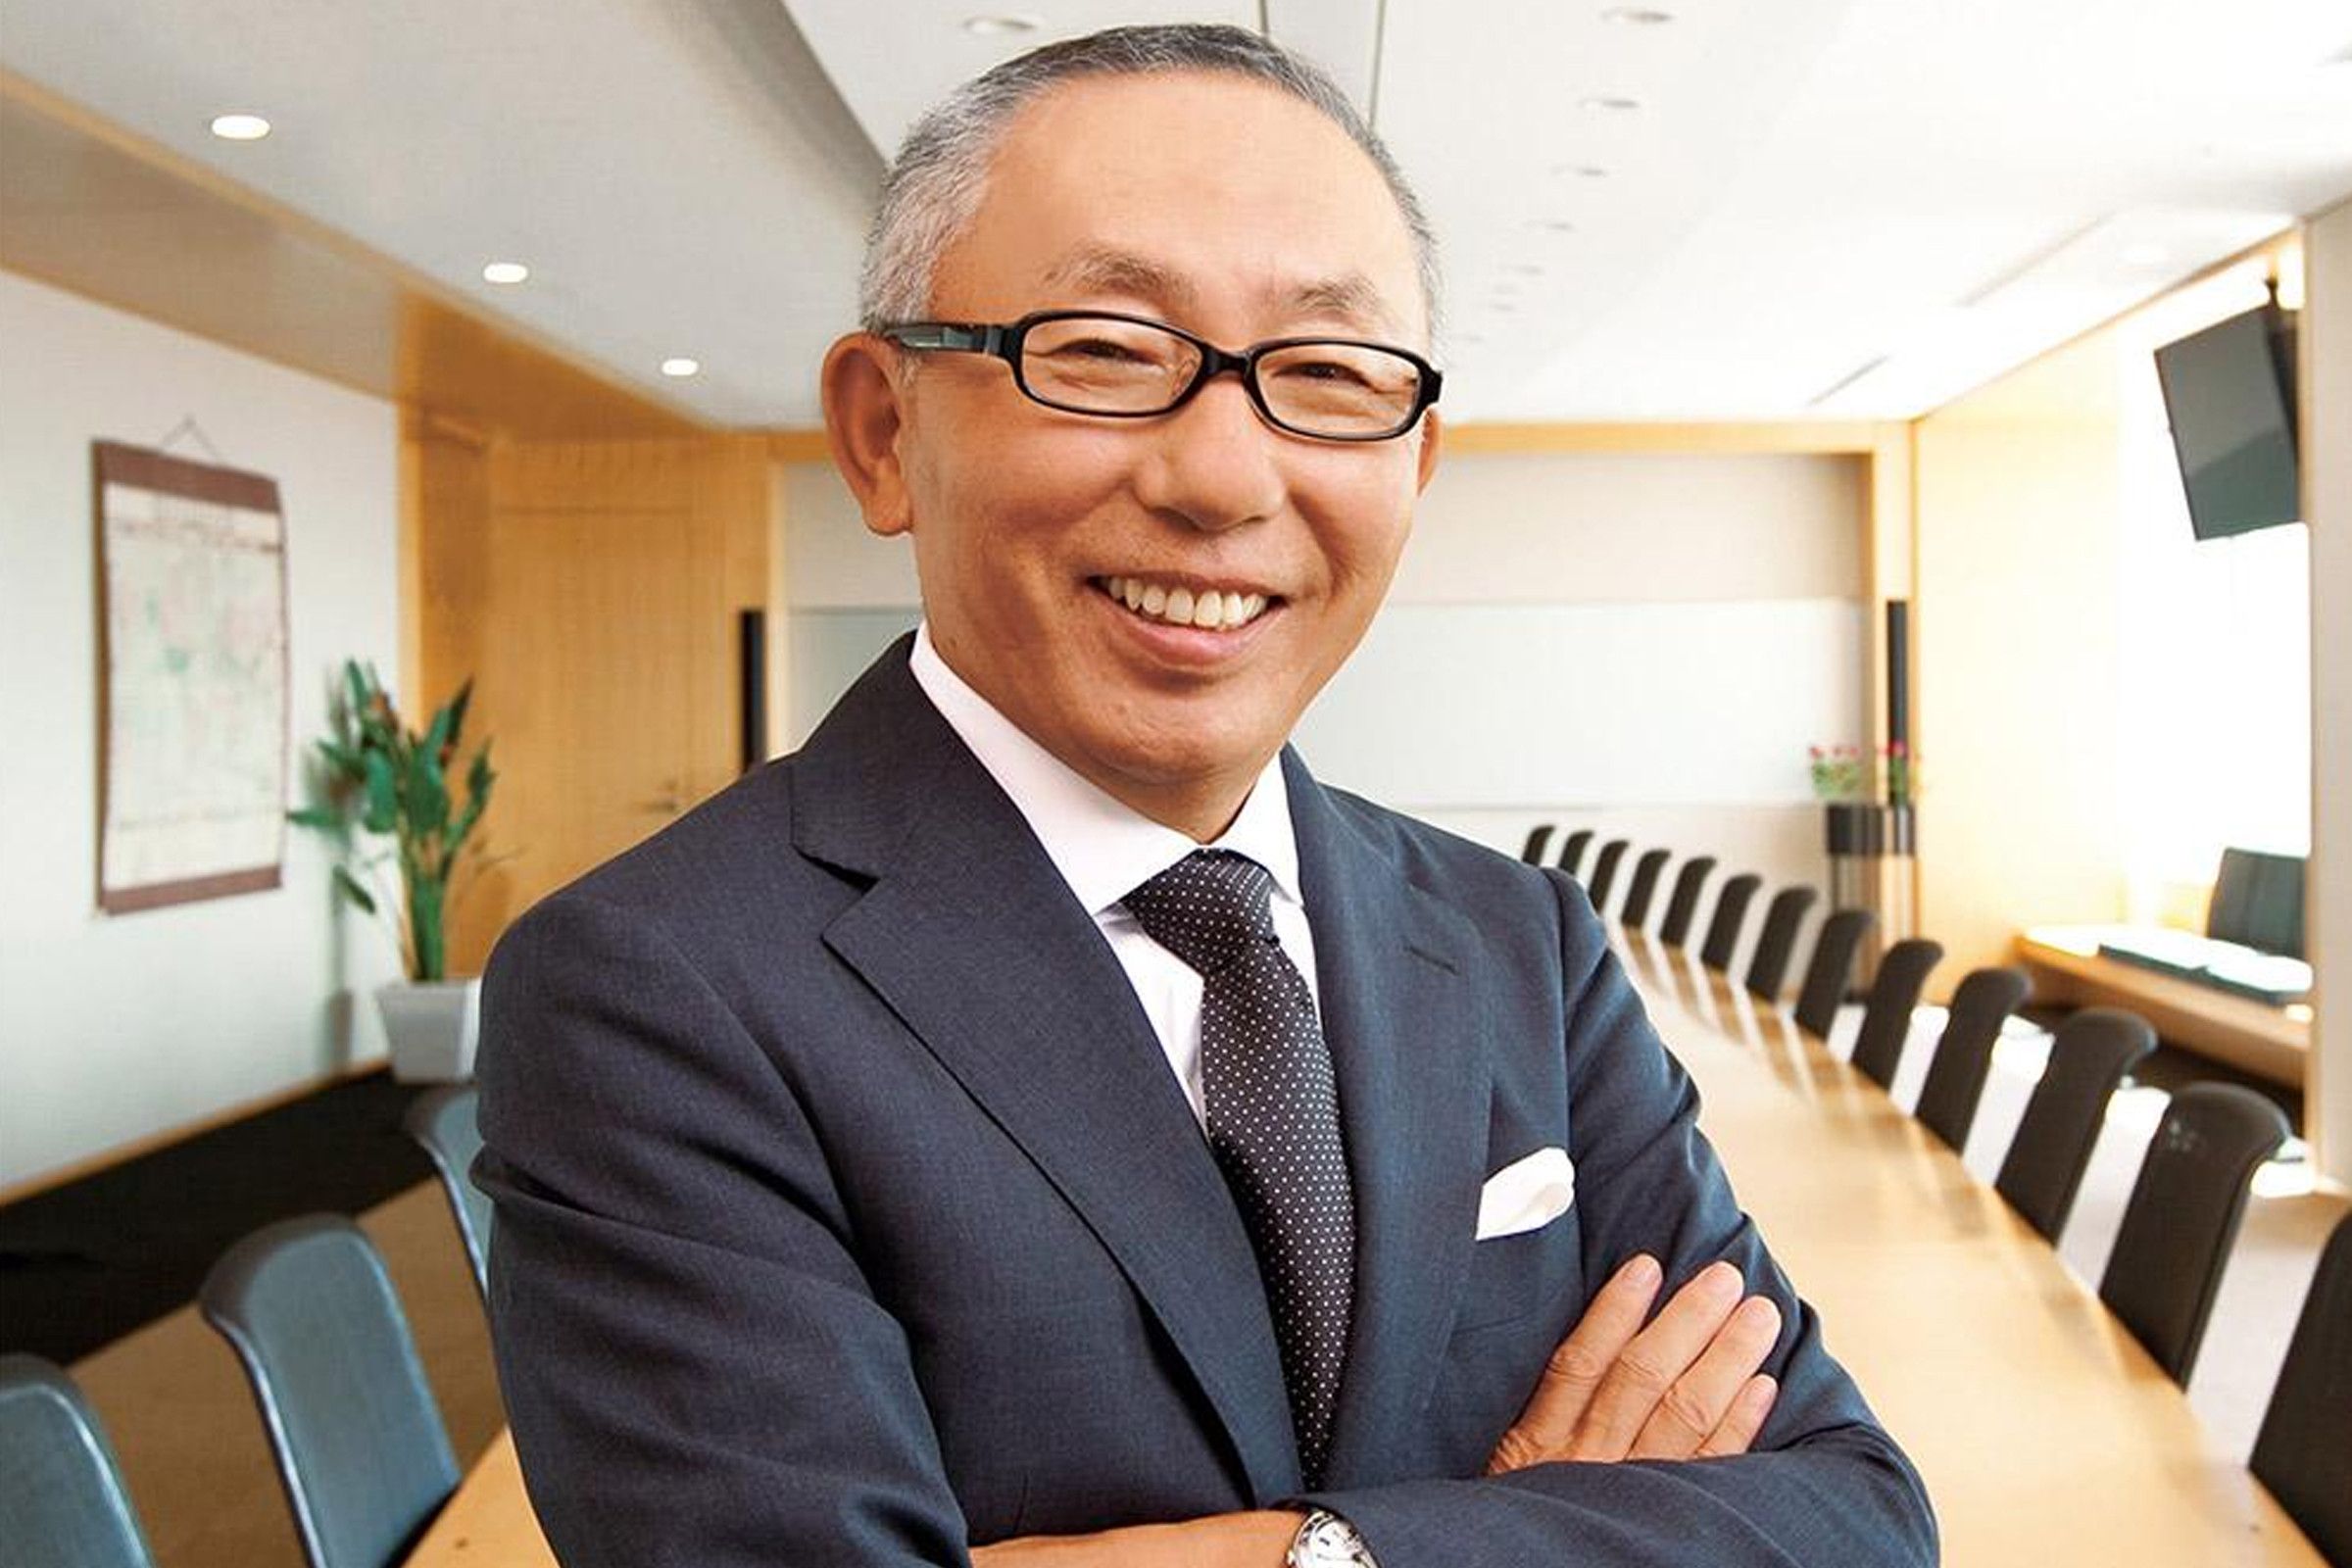 Tadashi Yanai, founder and president of Fast Retailing and Uniqlo